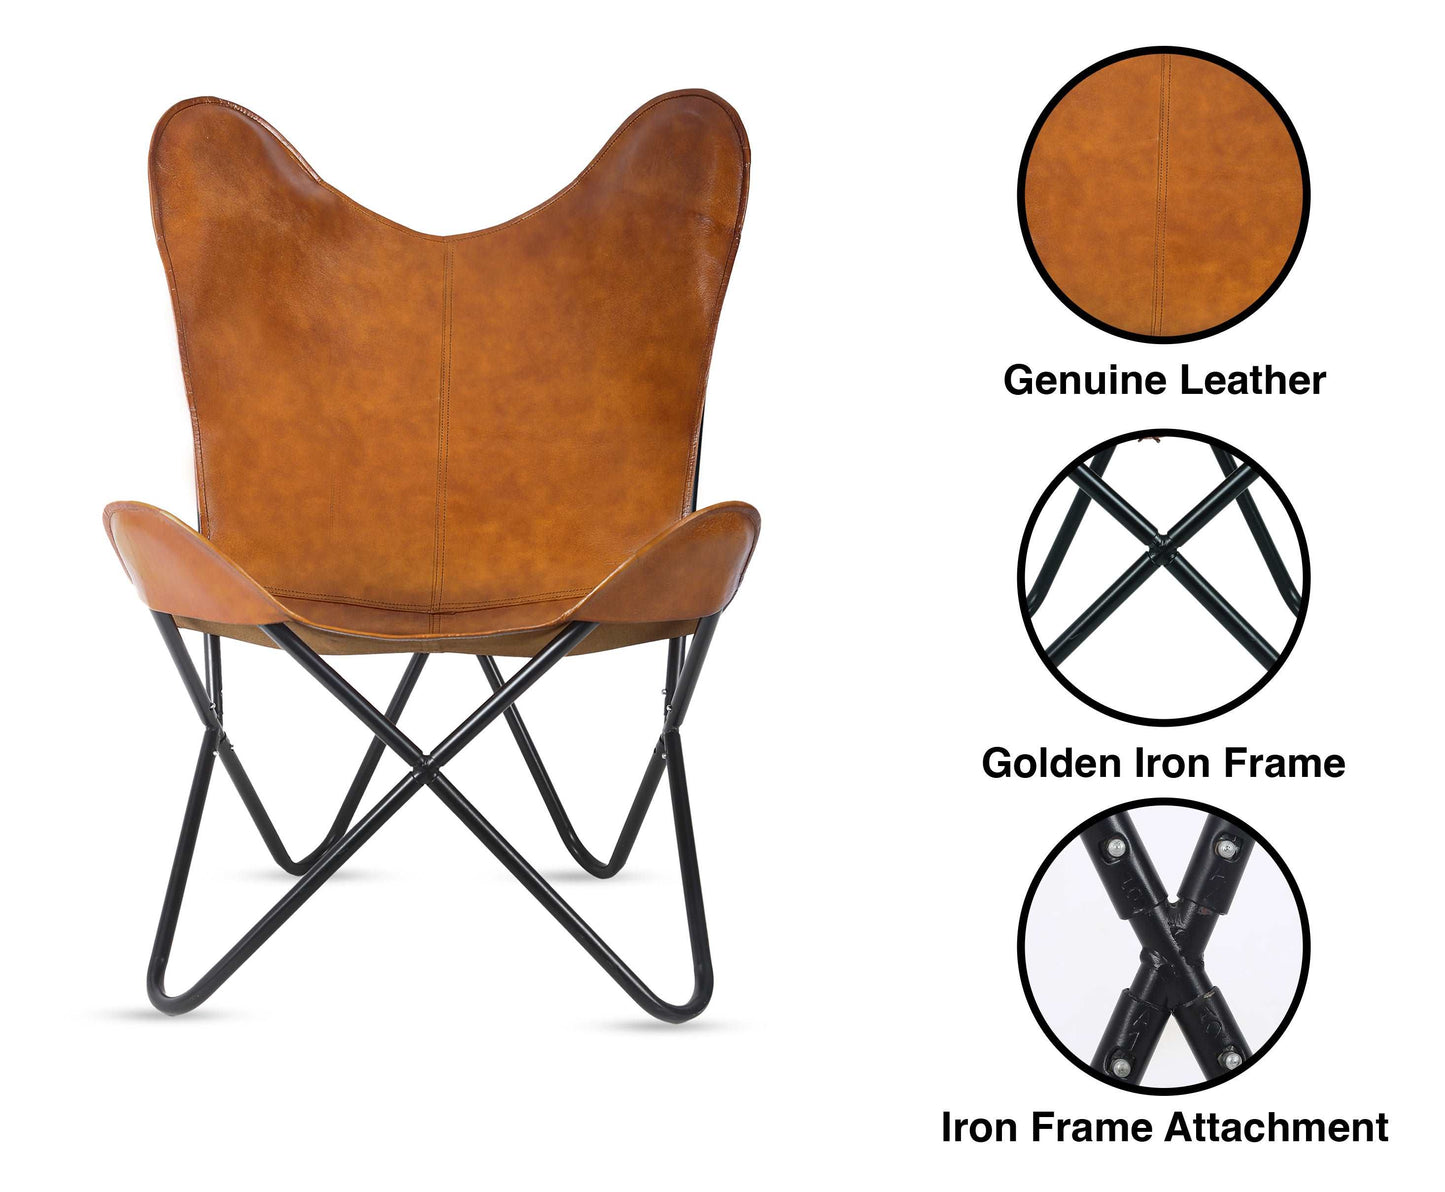 Handmade Leather Living Room Chairs-Butterfly Chair Tan Leather Butterfly Chair-Handmade with Powder Coated Folding Iron Frame